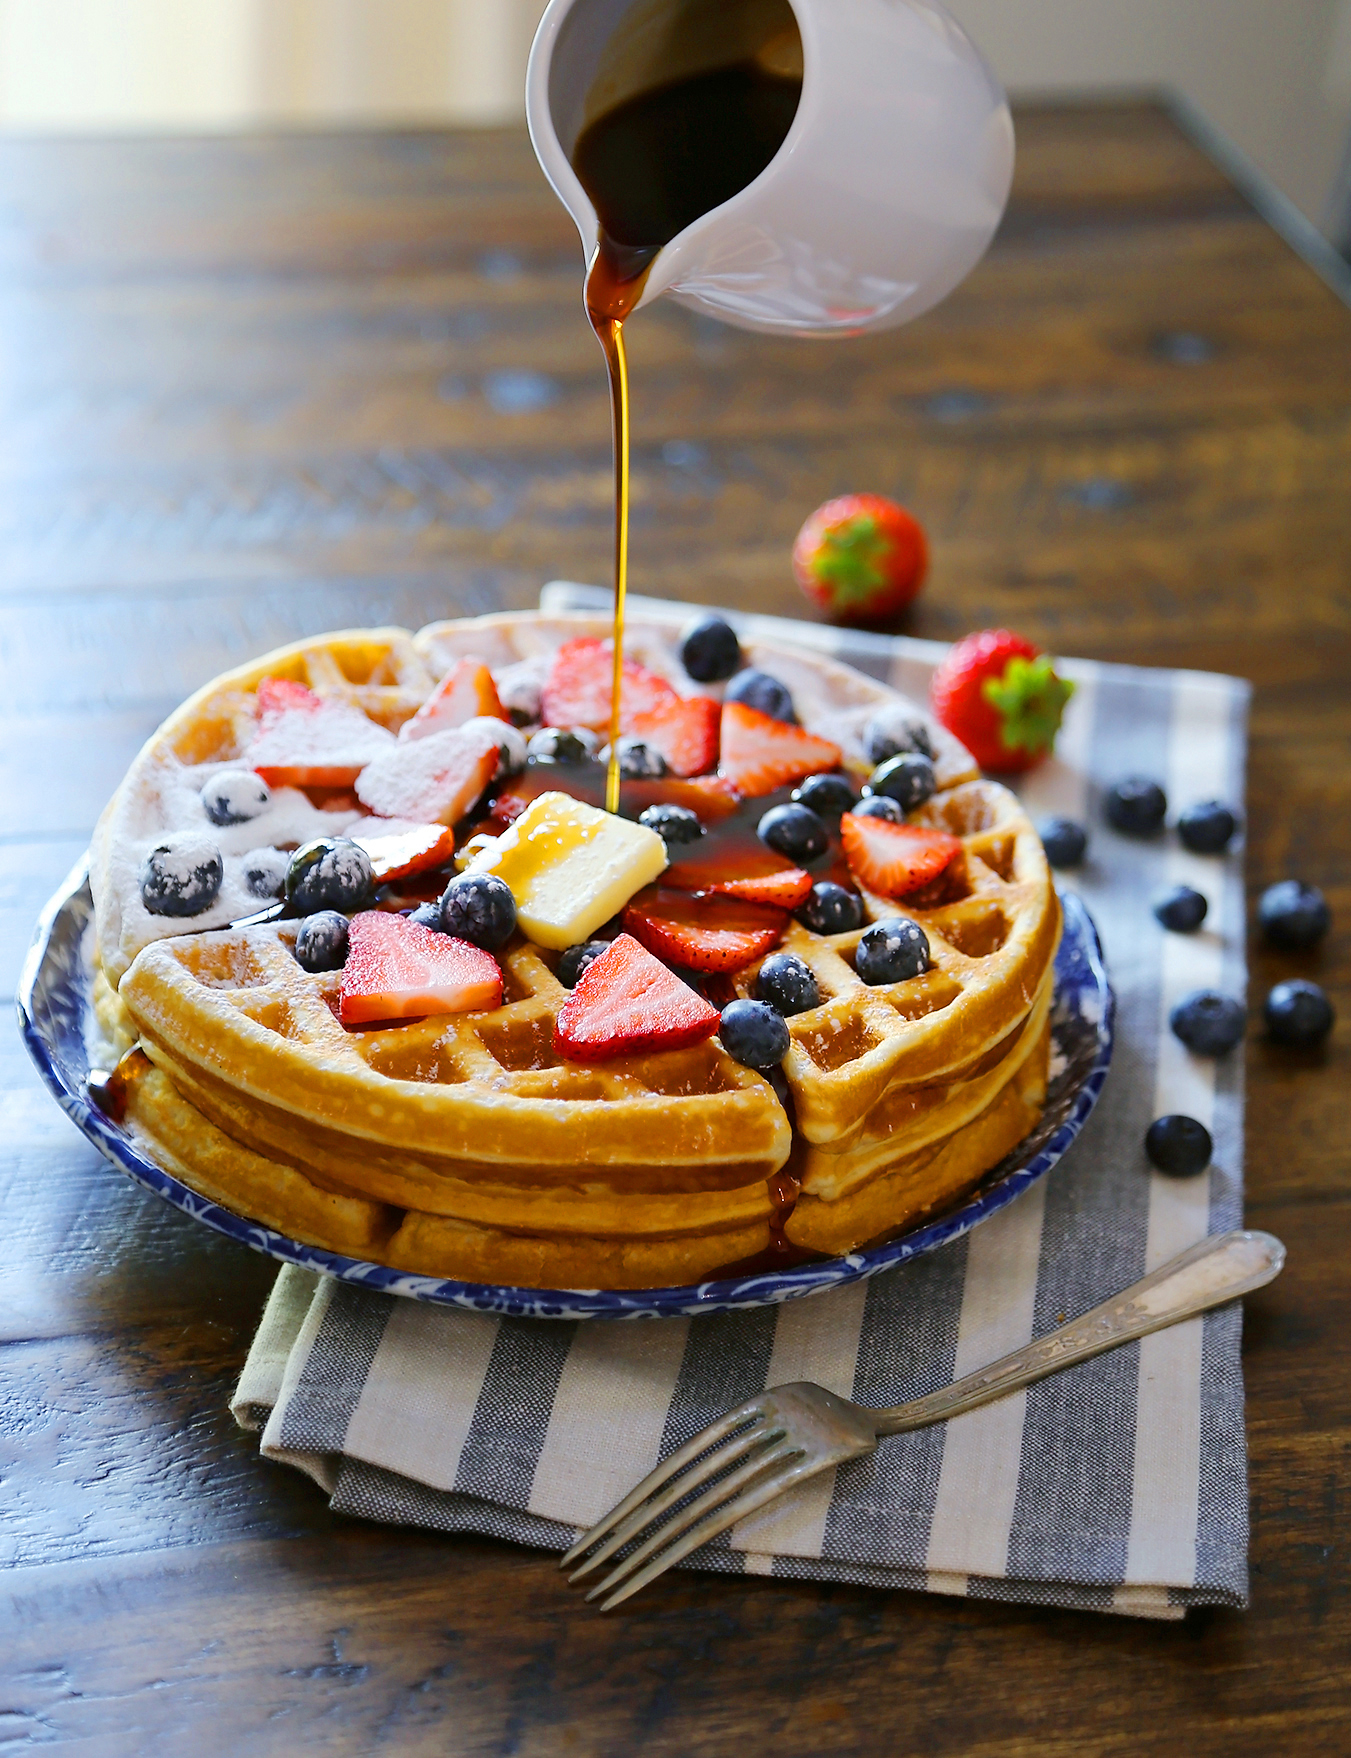 Fluffy Belgian Waffles - The BEST soft-yet-crisp, thick Belgian waffles made easy at home. thecomfortofcooking.com